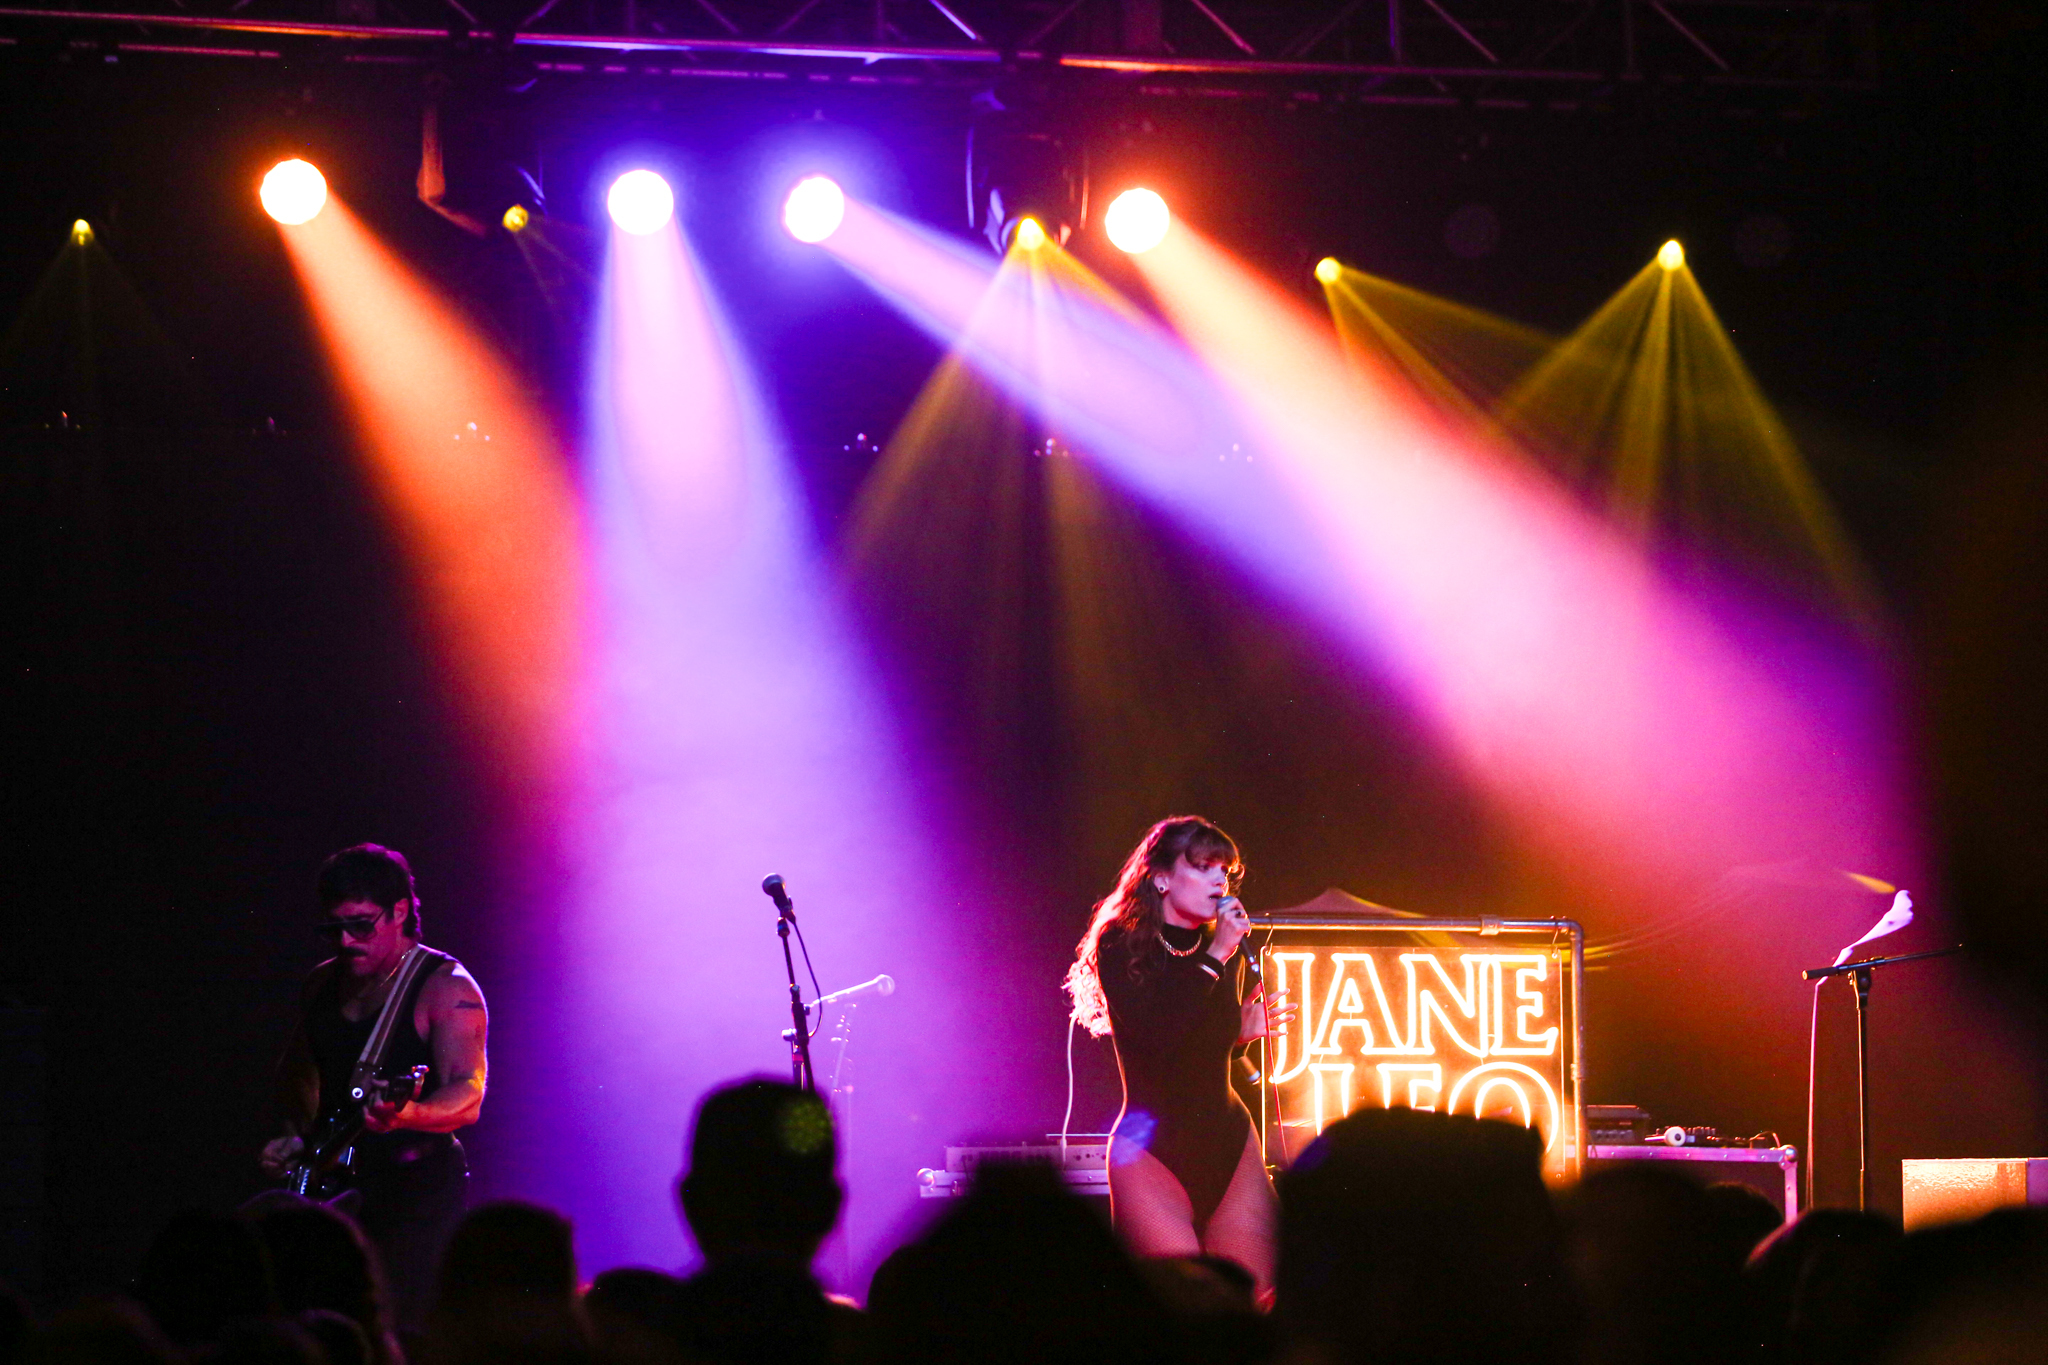 Jane Leo is an amazing new artist emerging on the synth pop scene.  